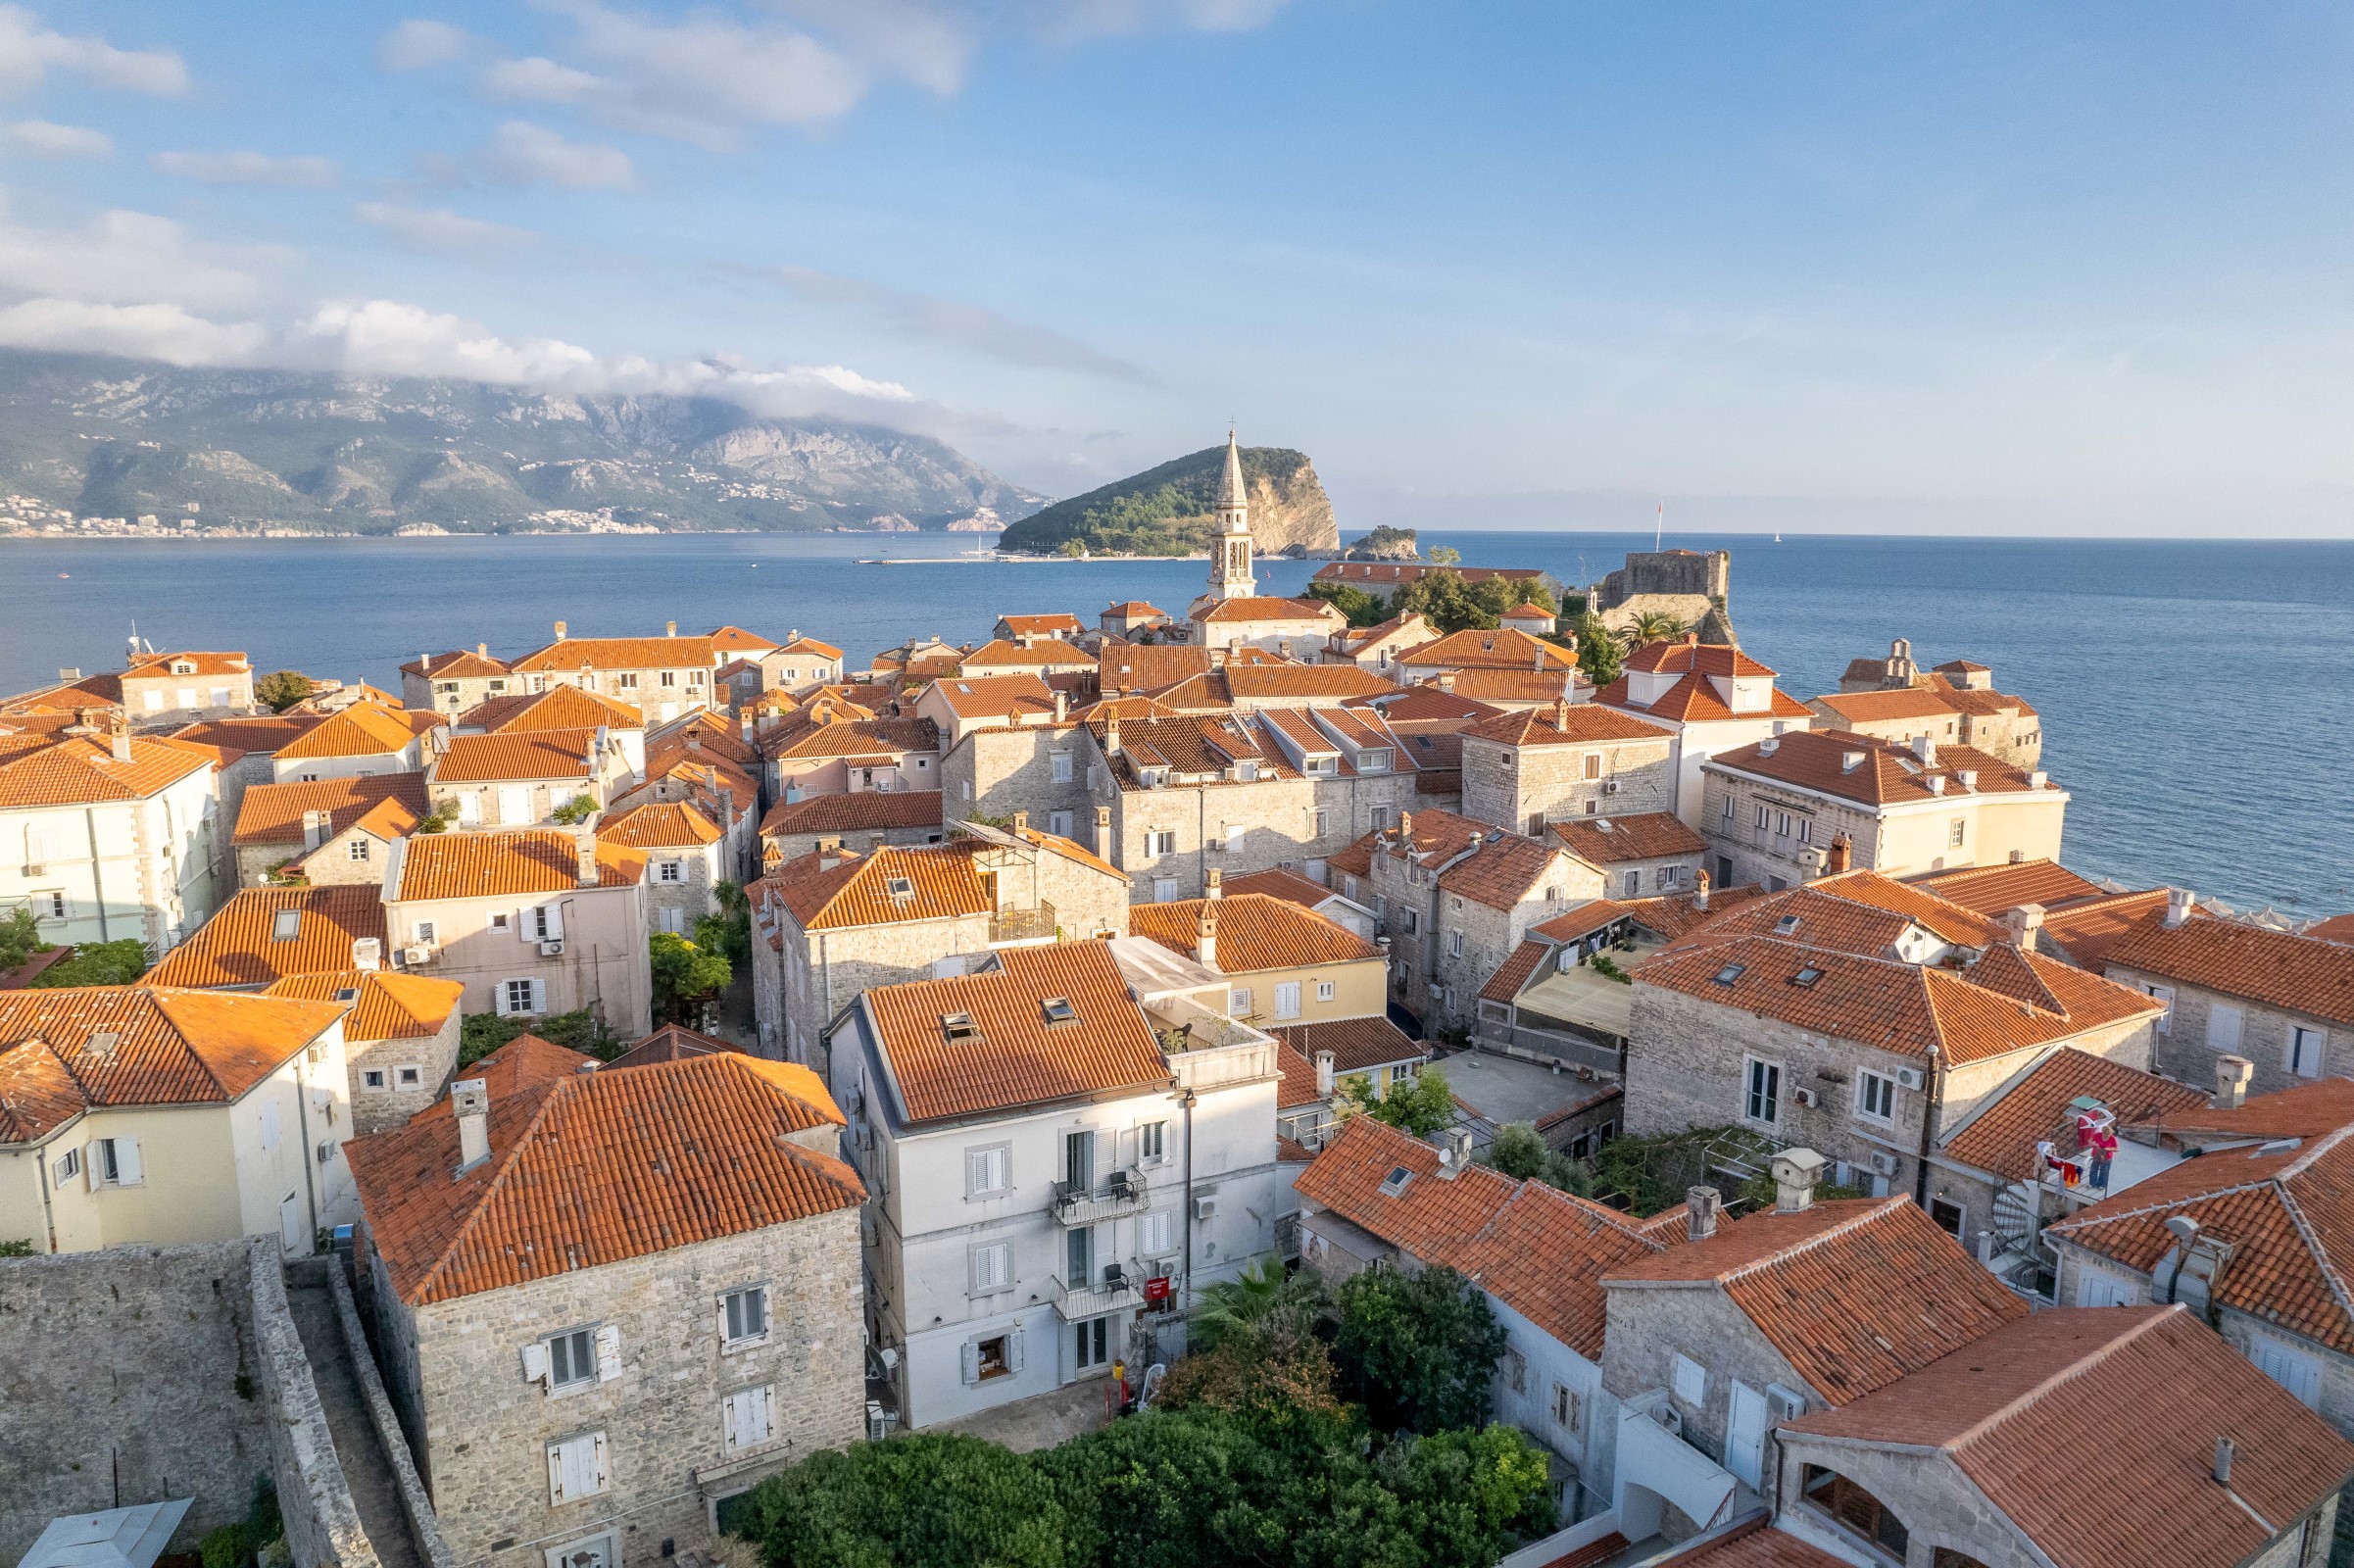 Budva, Old Town – an authentic stone villa in the center of the Old Town